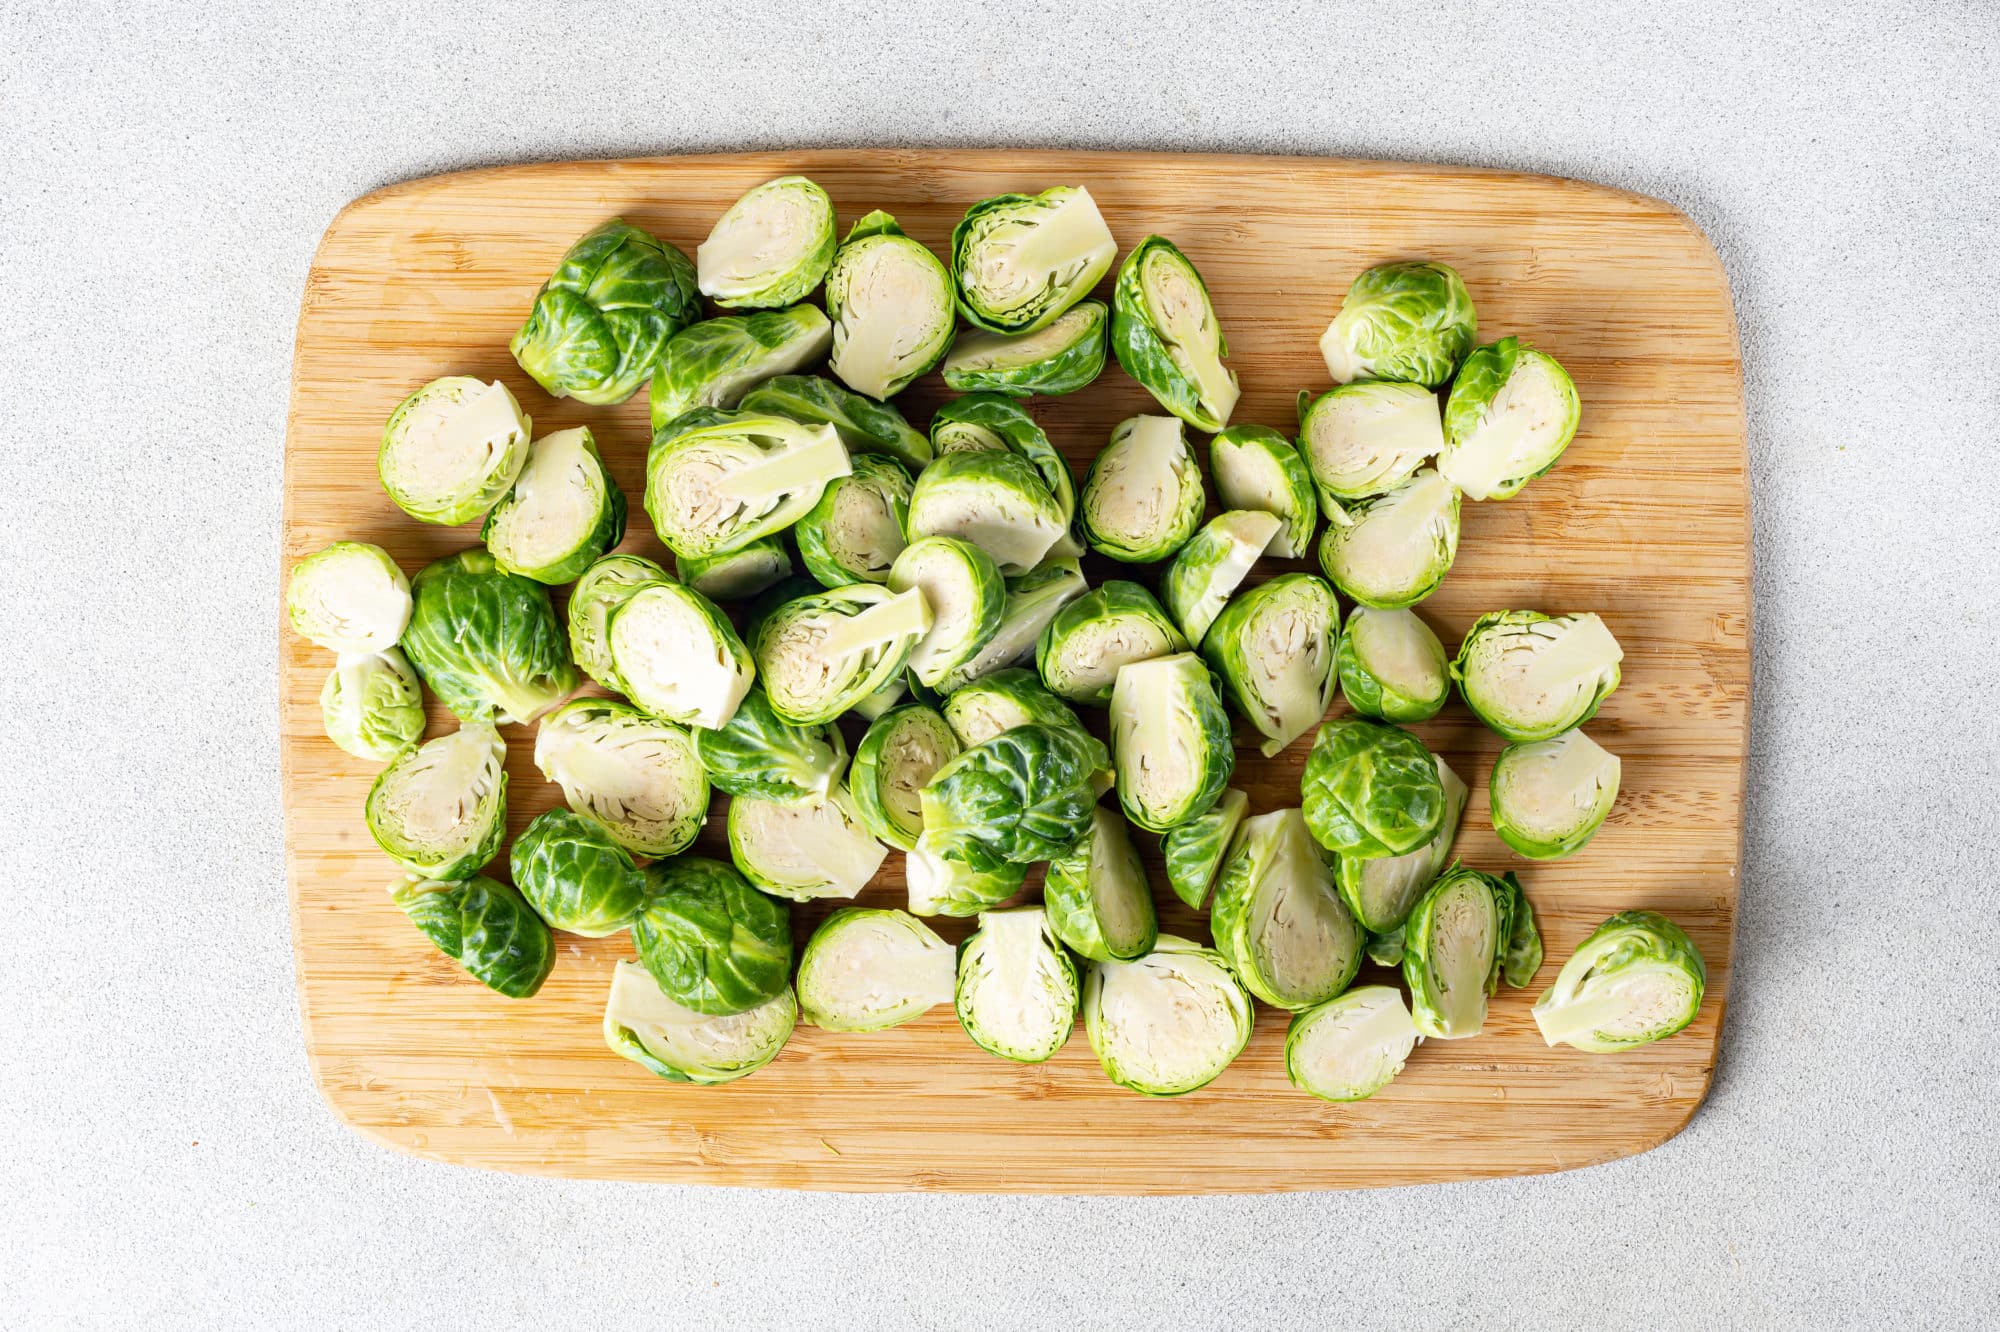 a wooden cutting board with chopped brussels sprouts on it.